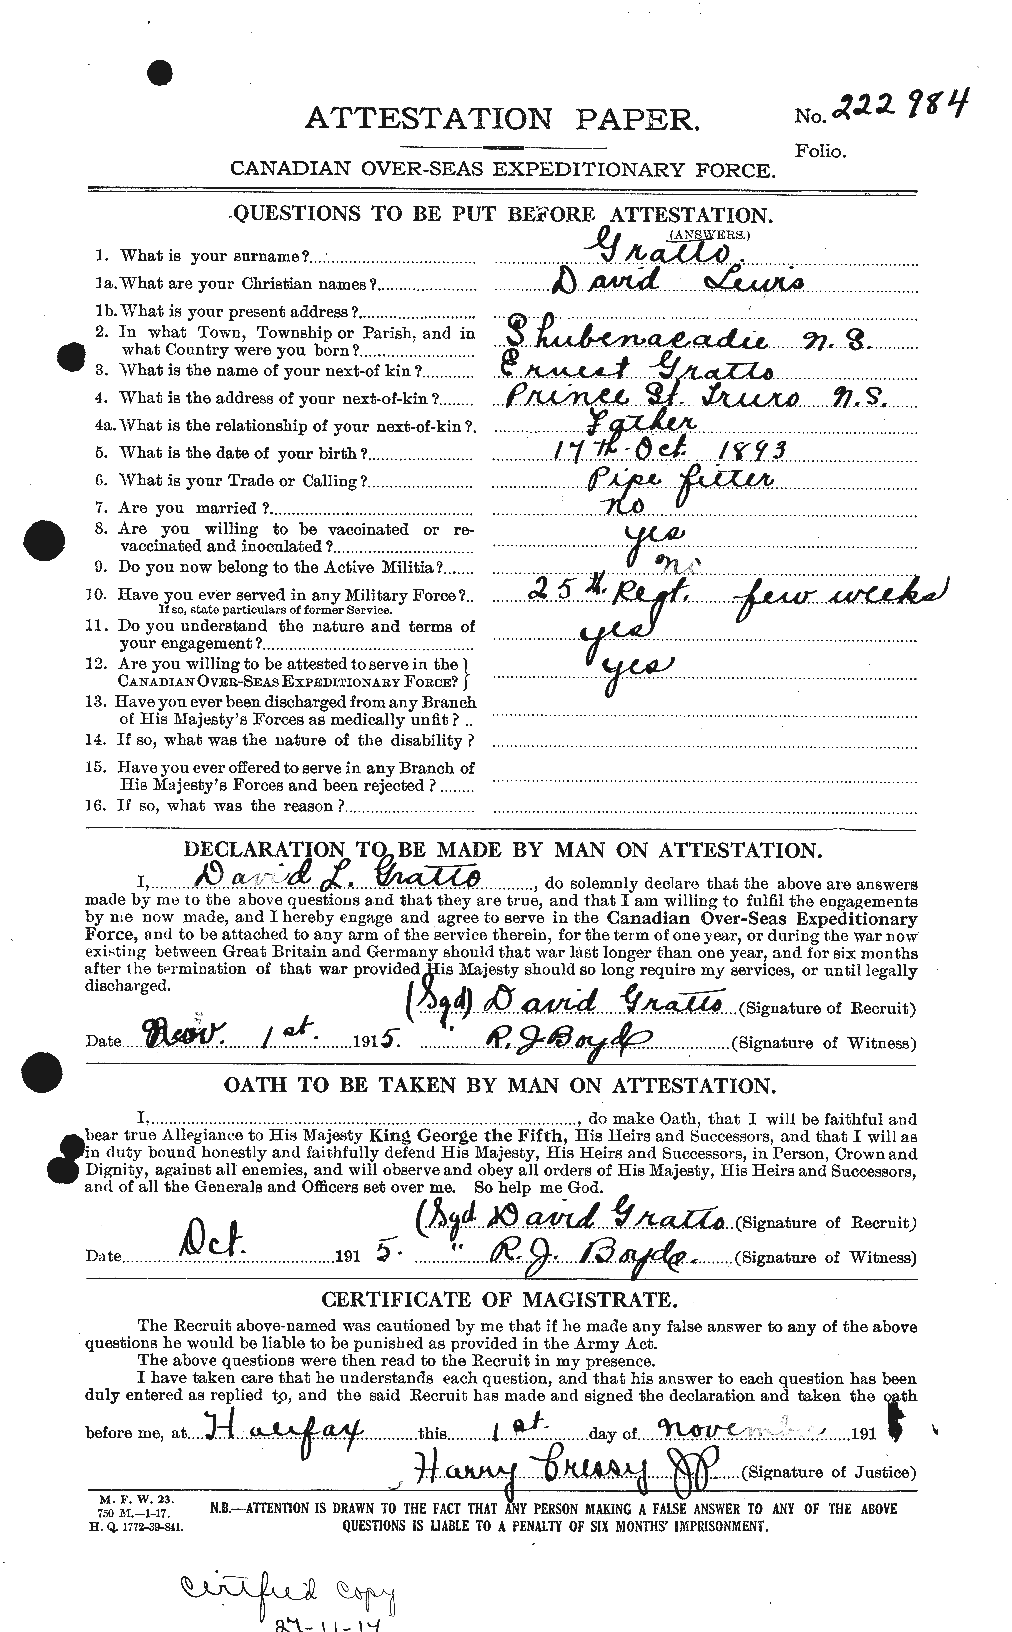 Personnel Records of the First World War - CEF 364523a